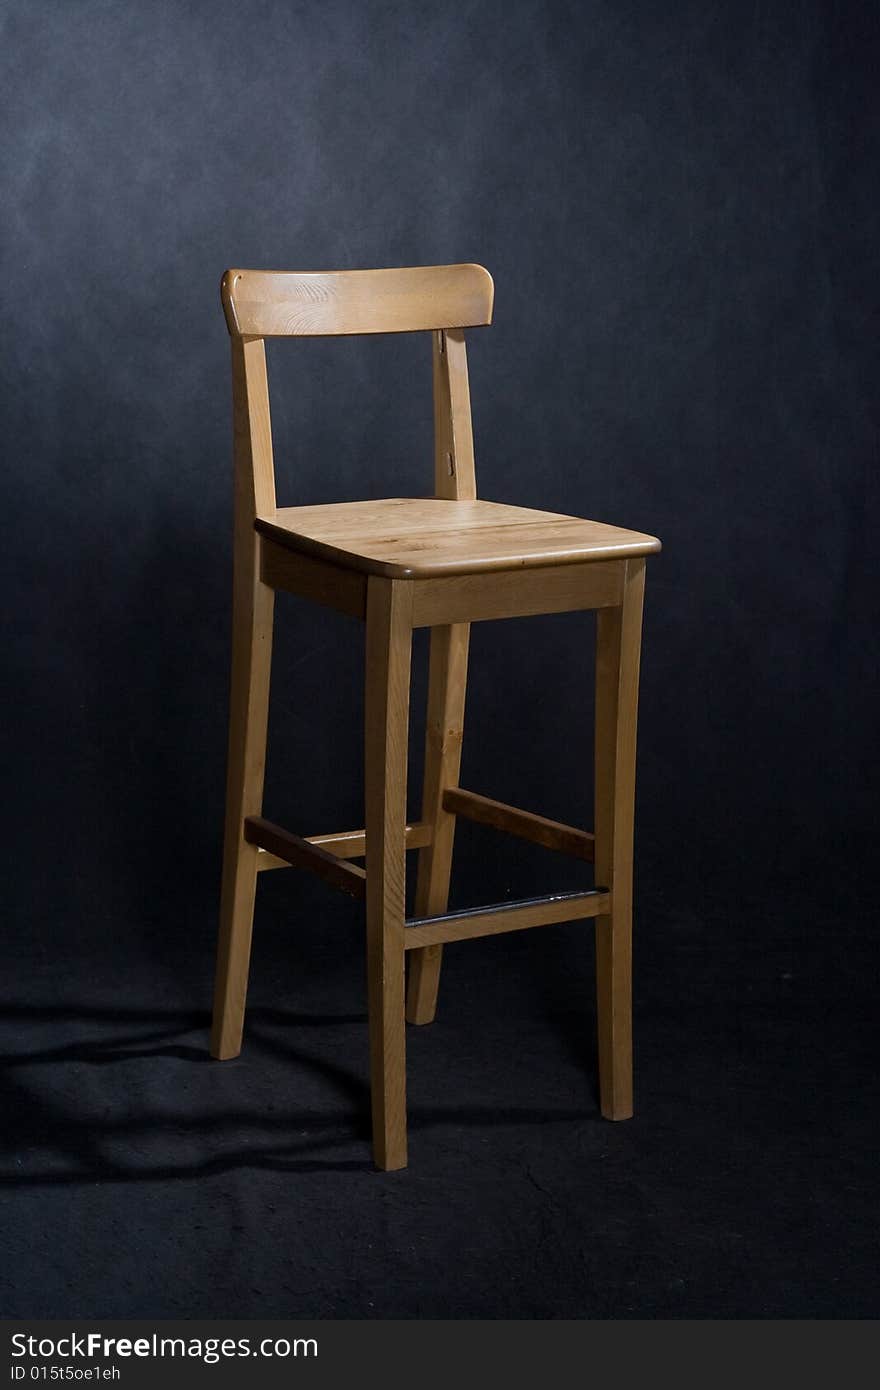 Wooden lacquered chair on black